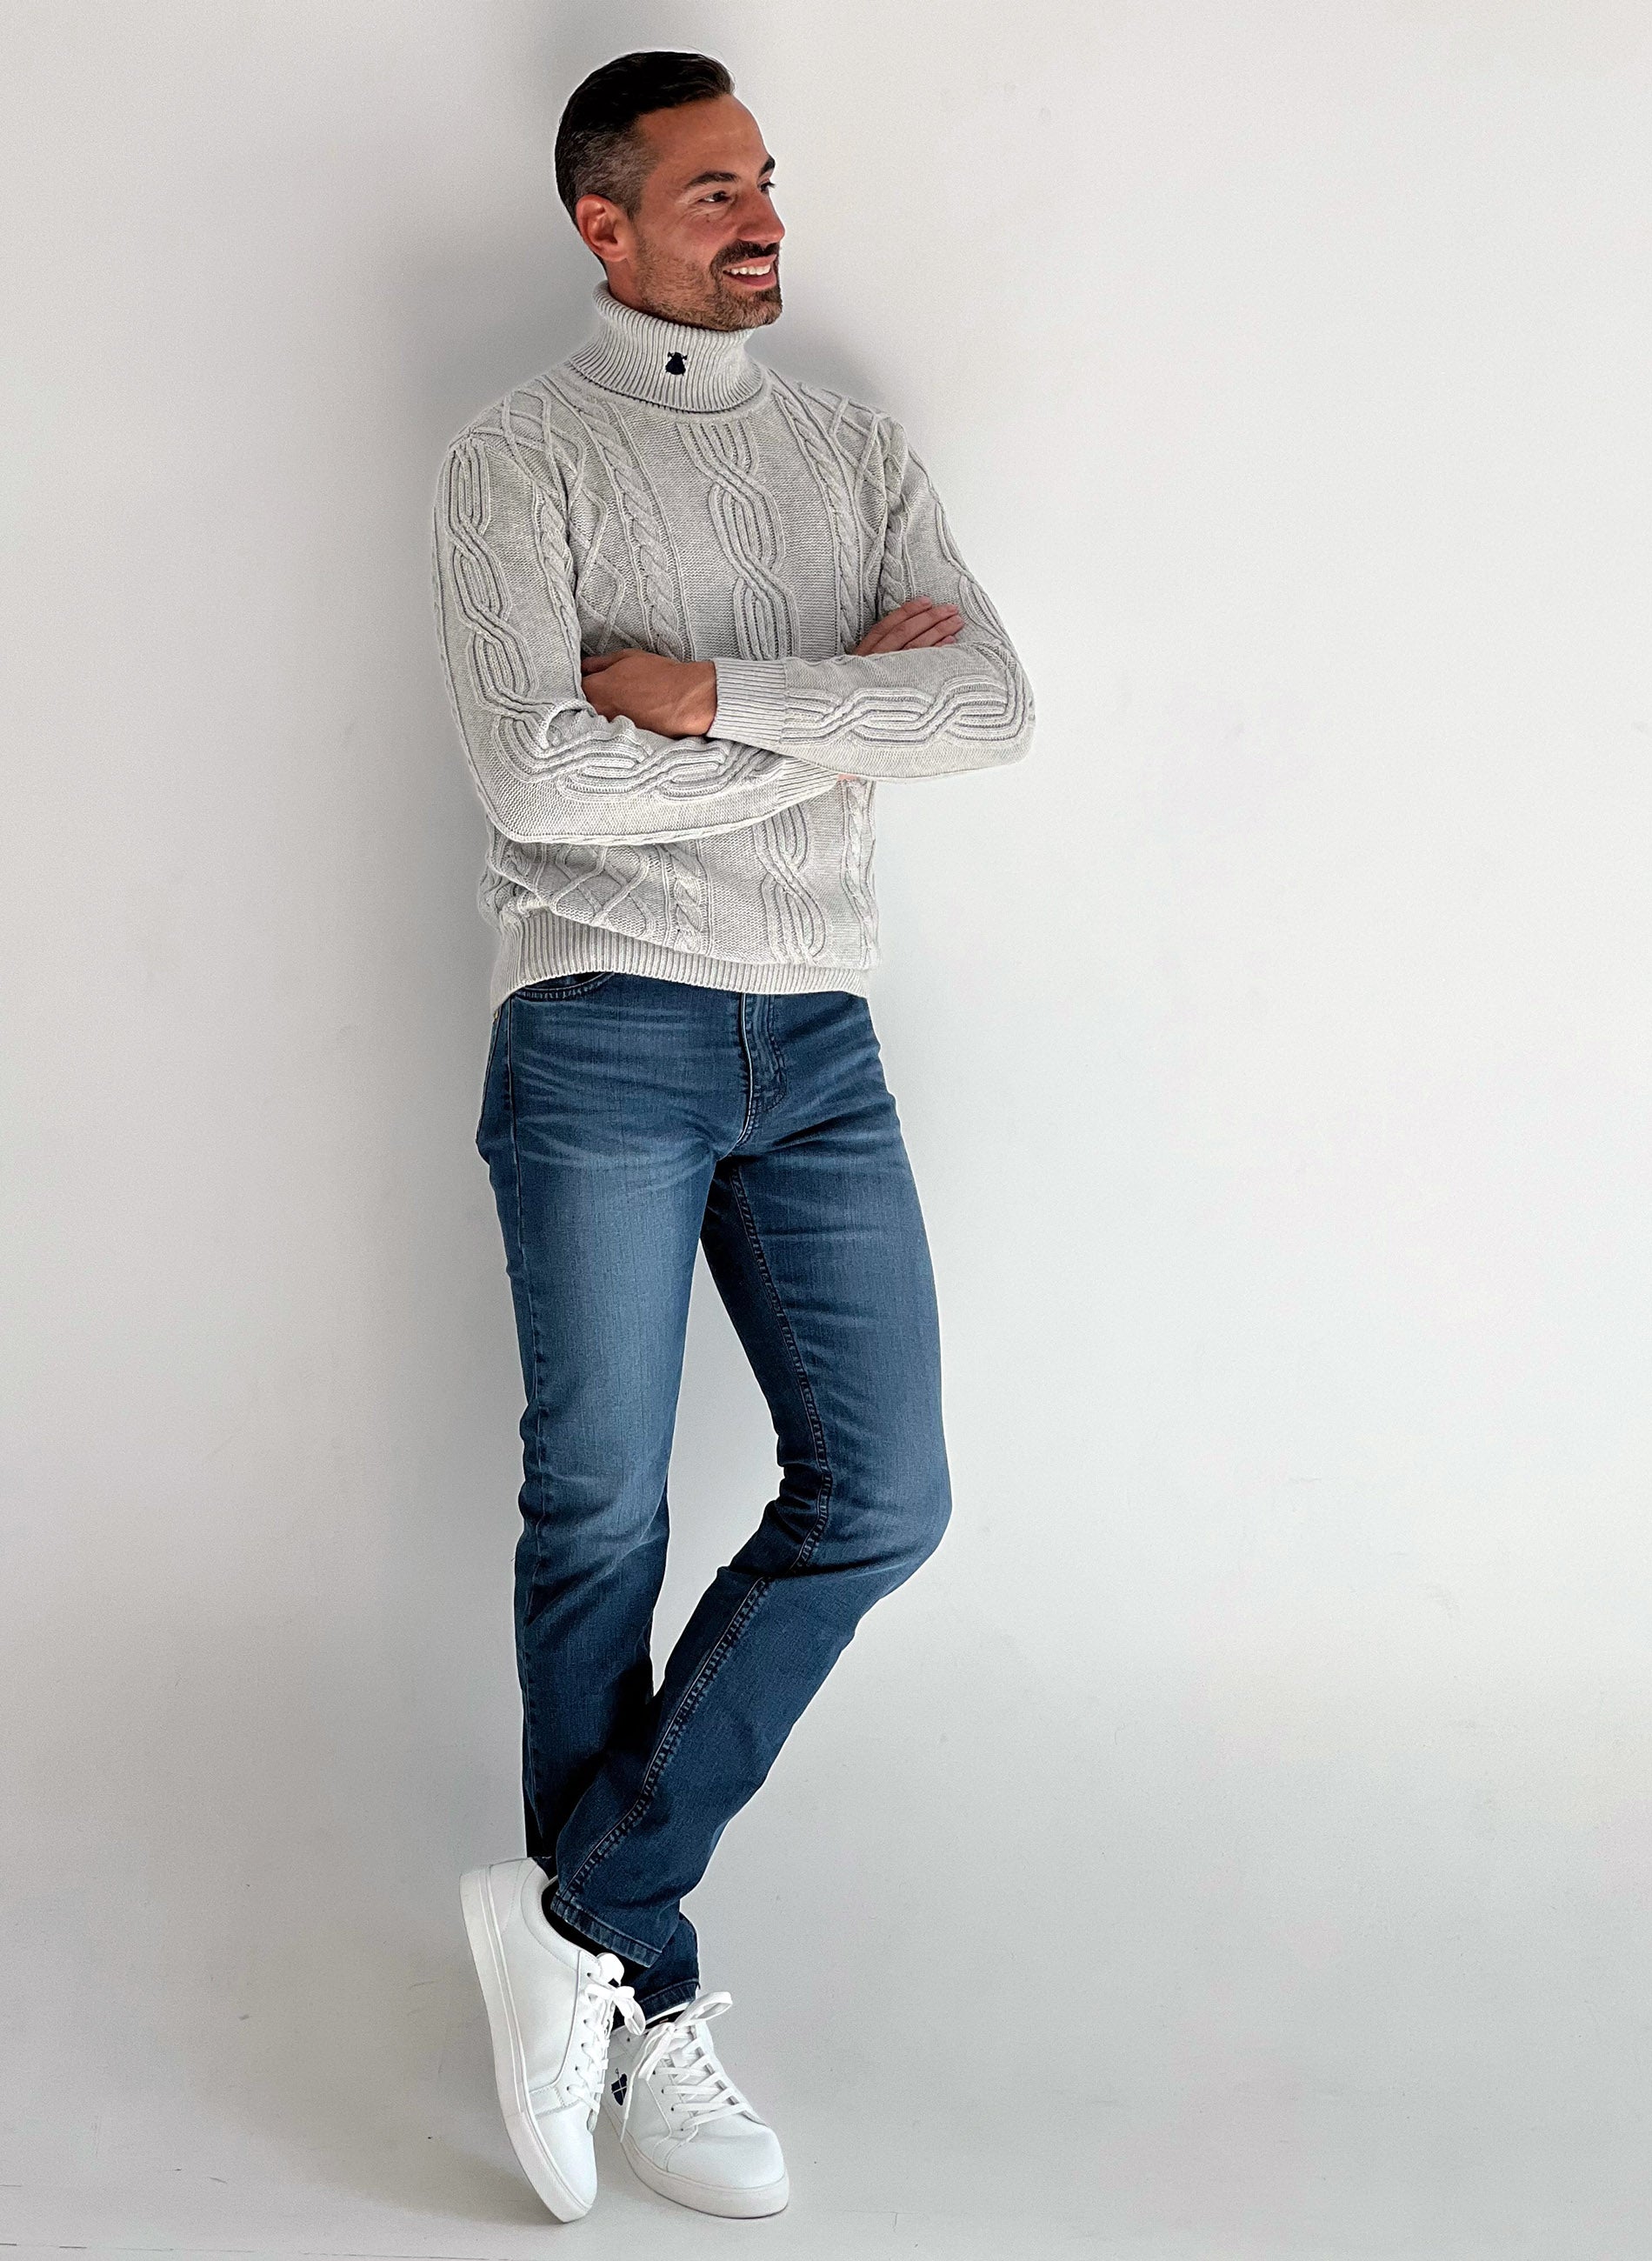 Gray Crew Neck Men's Cable Knit Sweater